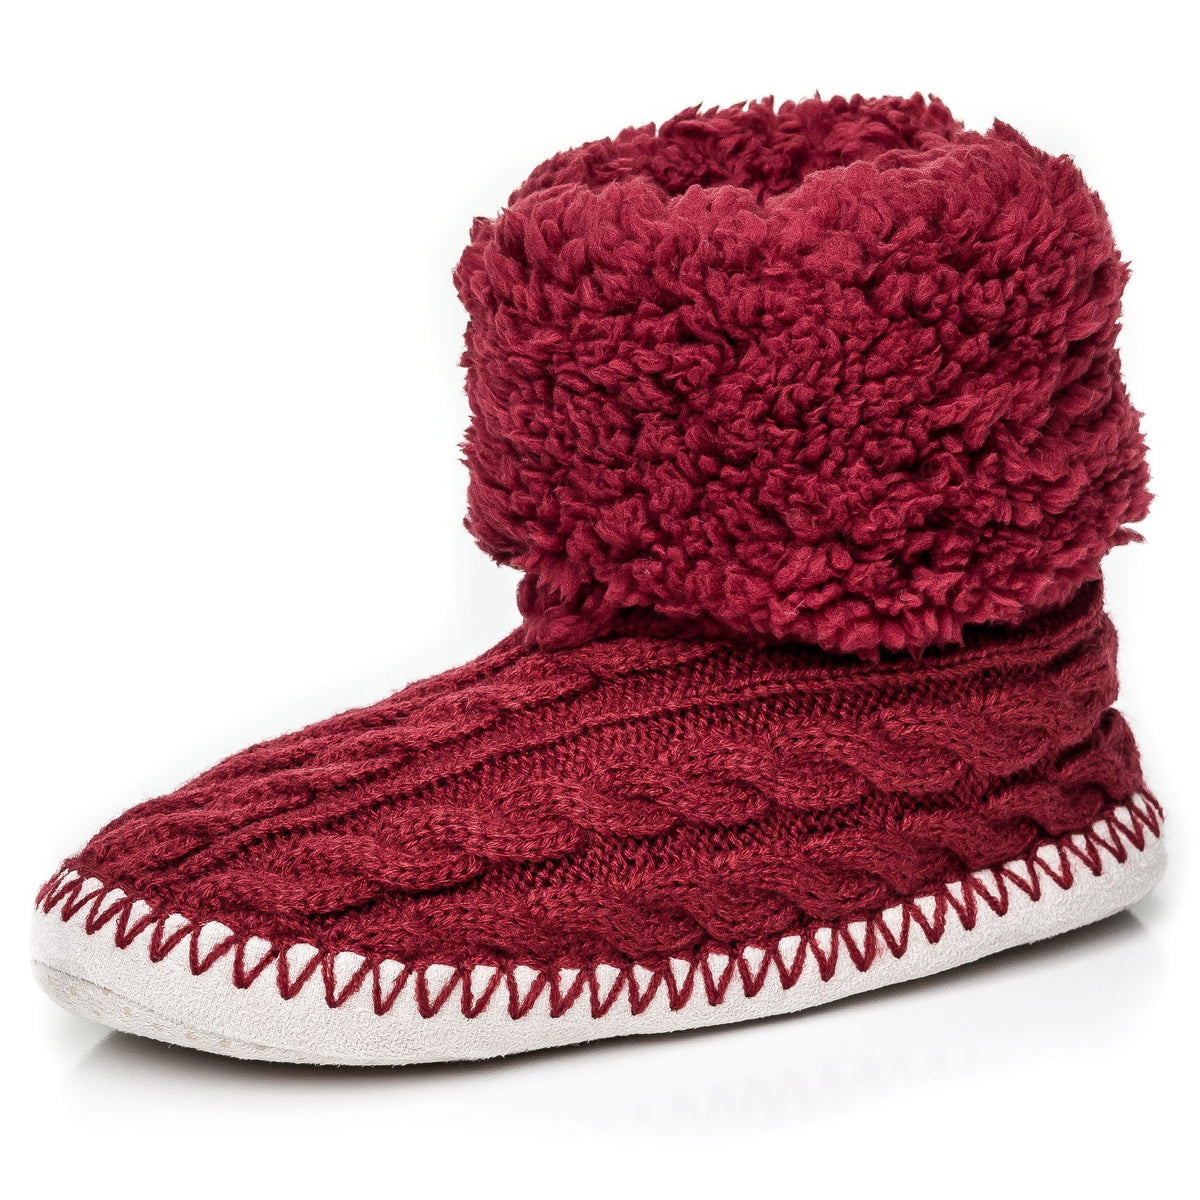 Women's Fuzzy Delight Cable Knit Indoor Short Boot Slippers - Red